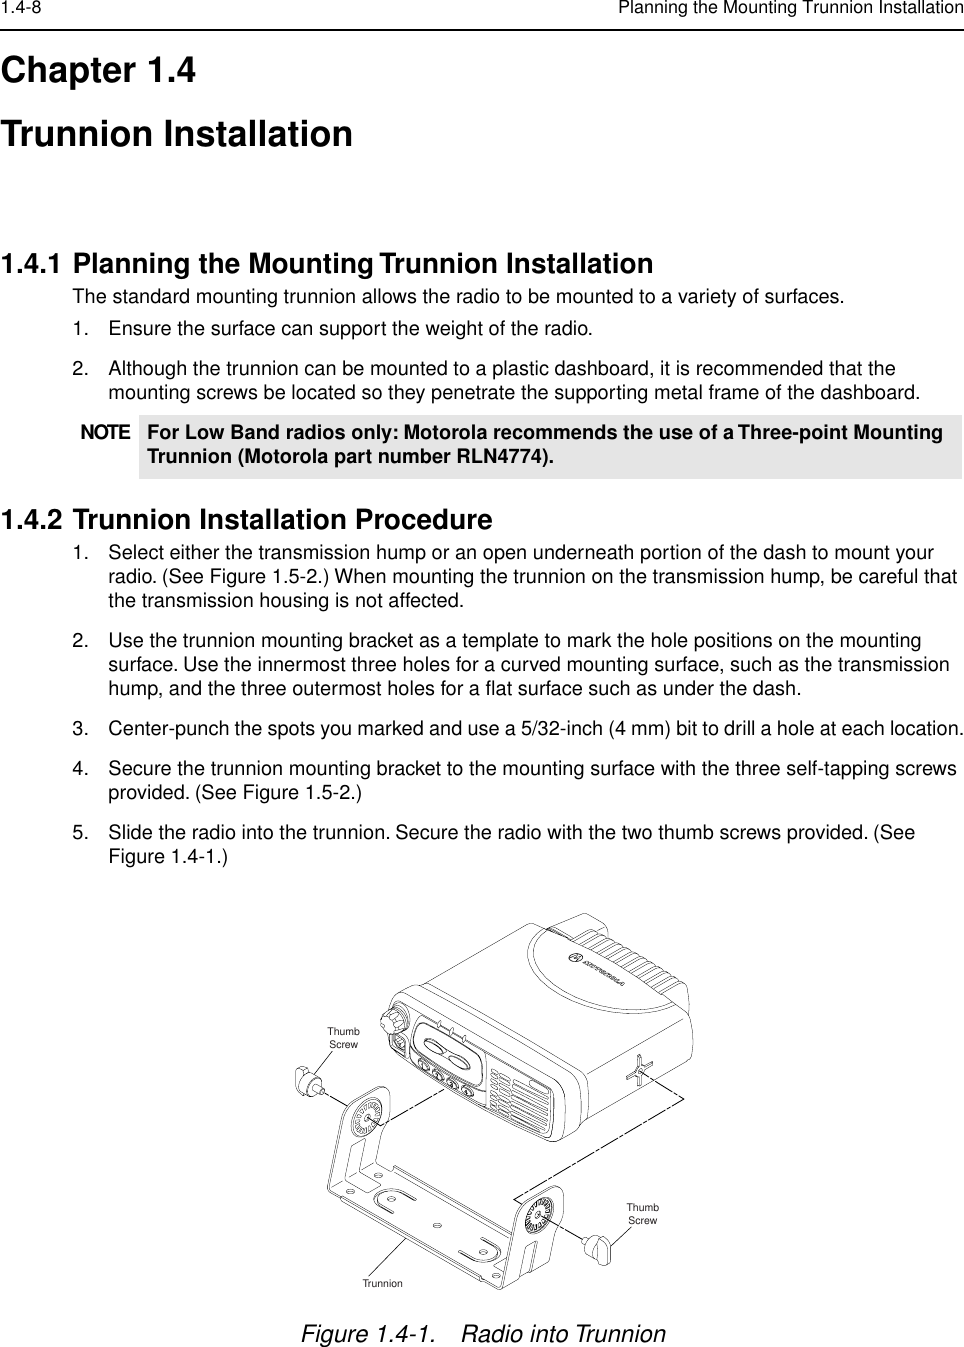  1.4-8 Planning the Mounting Trunnion Installation Chapter 1.4Trunnion Installation 1.4.1 Planning the Mounting Trunnion Installation The standard mounting trunnion allows the radio to be mounted to a variety of surfaces.1. Ensure the surface can support the weight of the radio.2. Although the trunnion can be mounted to a plastic dashboard, it is recommended that the mounting screws be located so they penetrate the supporting metal frame of the dashboard. 1.4.2 Trunnion Installation Procedure 1. Select either the transmission hump or an open underneath portion of the dash to mount your radio. (See Figure 1.5-2.) When mounting the trunnion on the transmission hump, be careful that the transmission housing is not affected.2. Use the trunnion mounting bracket as a template to mark the hole positions on the mounting surface. Use the innermost three holes for a curved mounting surface, such as the transmission hump, and the three outermost holes for a ﬂat surface such as under the dash.3. Center-punch the spots you marked and use a 5/32-inch (4 mm) bit to drill a hole at each location.4. Secure the trunnion mounting bracket to the mounting surface with the three self-tapping screws provided. (See Figure 1.5-2.)5. Slide the radio into the trunnion. Secure the radio with the two thumb screws provided. (See Figure 1.4-1.) NOTE For Low Band radios only: Motorola recommends the use of a Three-point Mounting Trunnion (Motorola part number RLN4774). Figure 1.4-1. Radio into TrunnionThumbScrewThumbScrewTrunnion